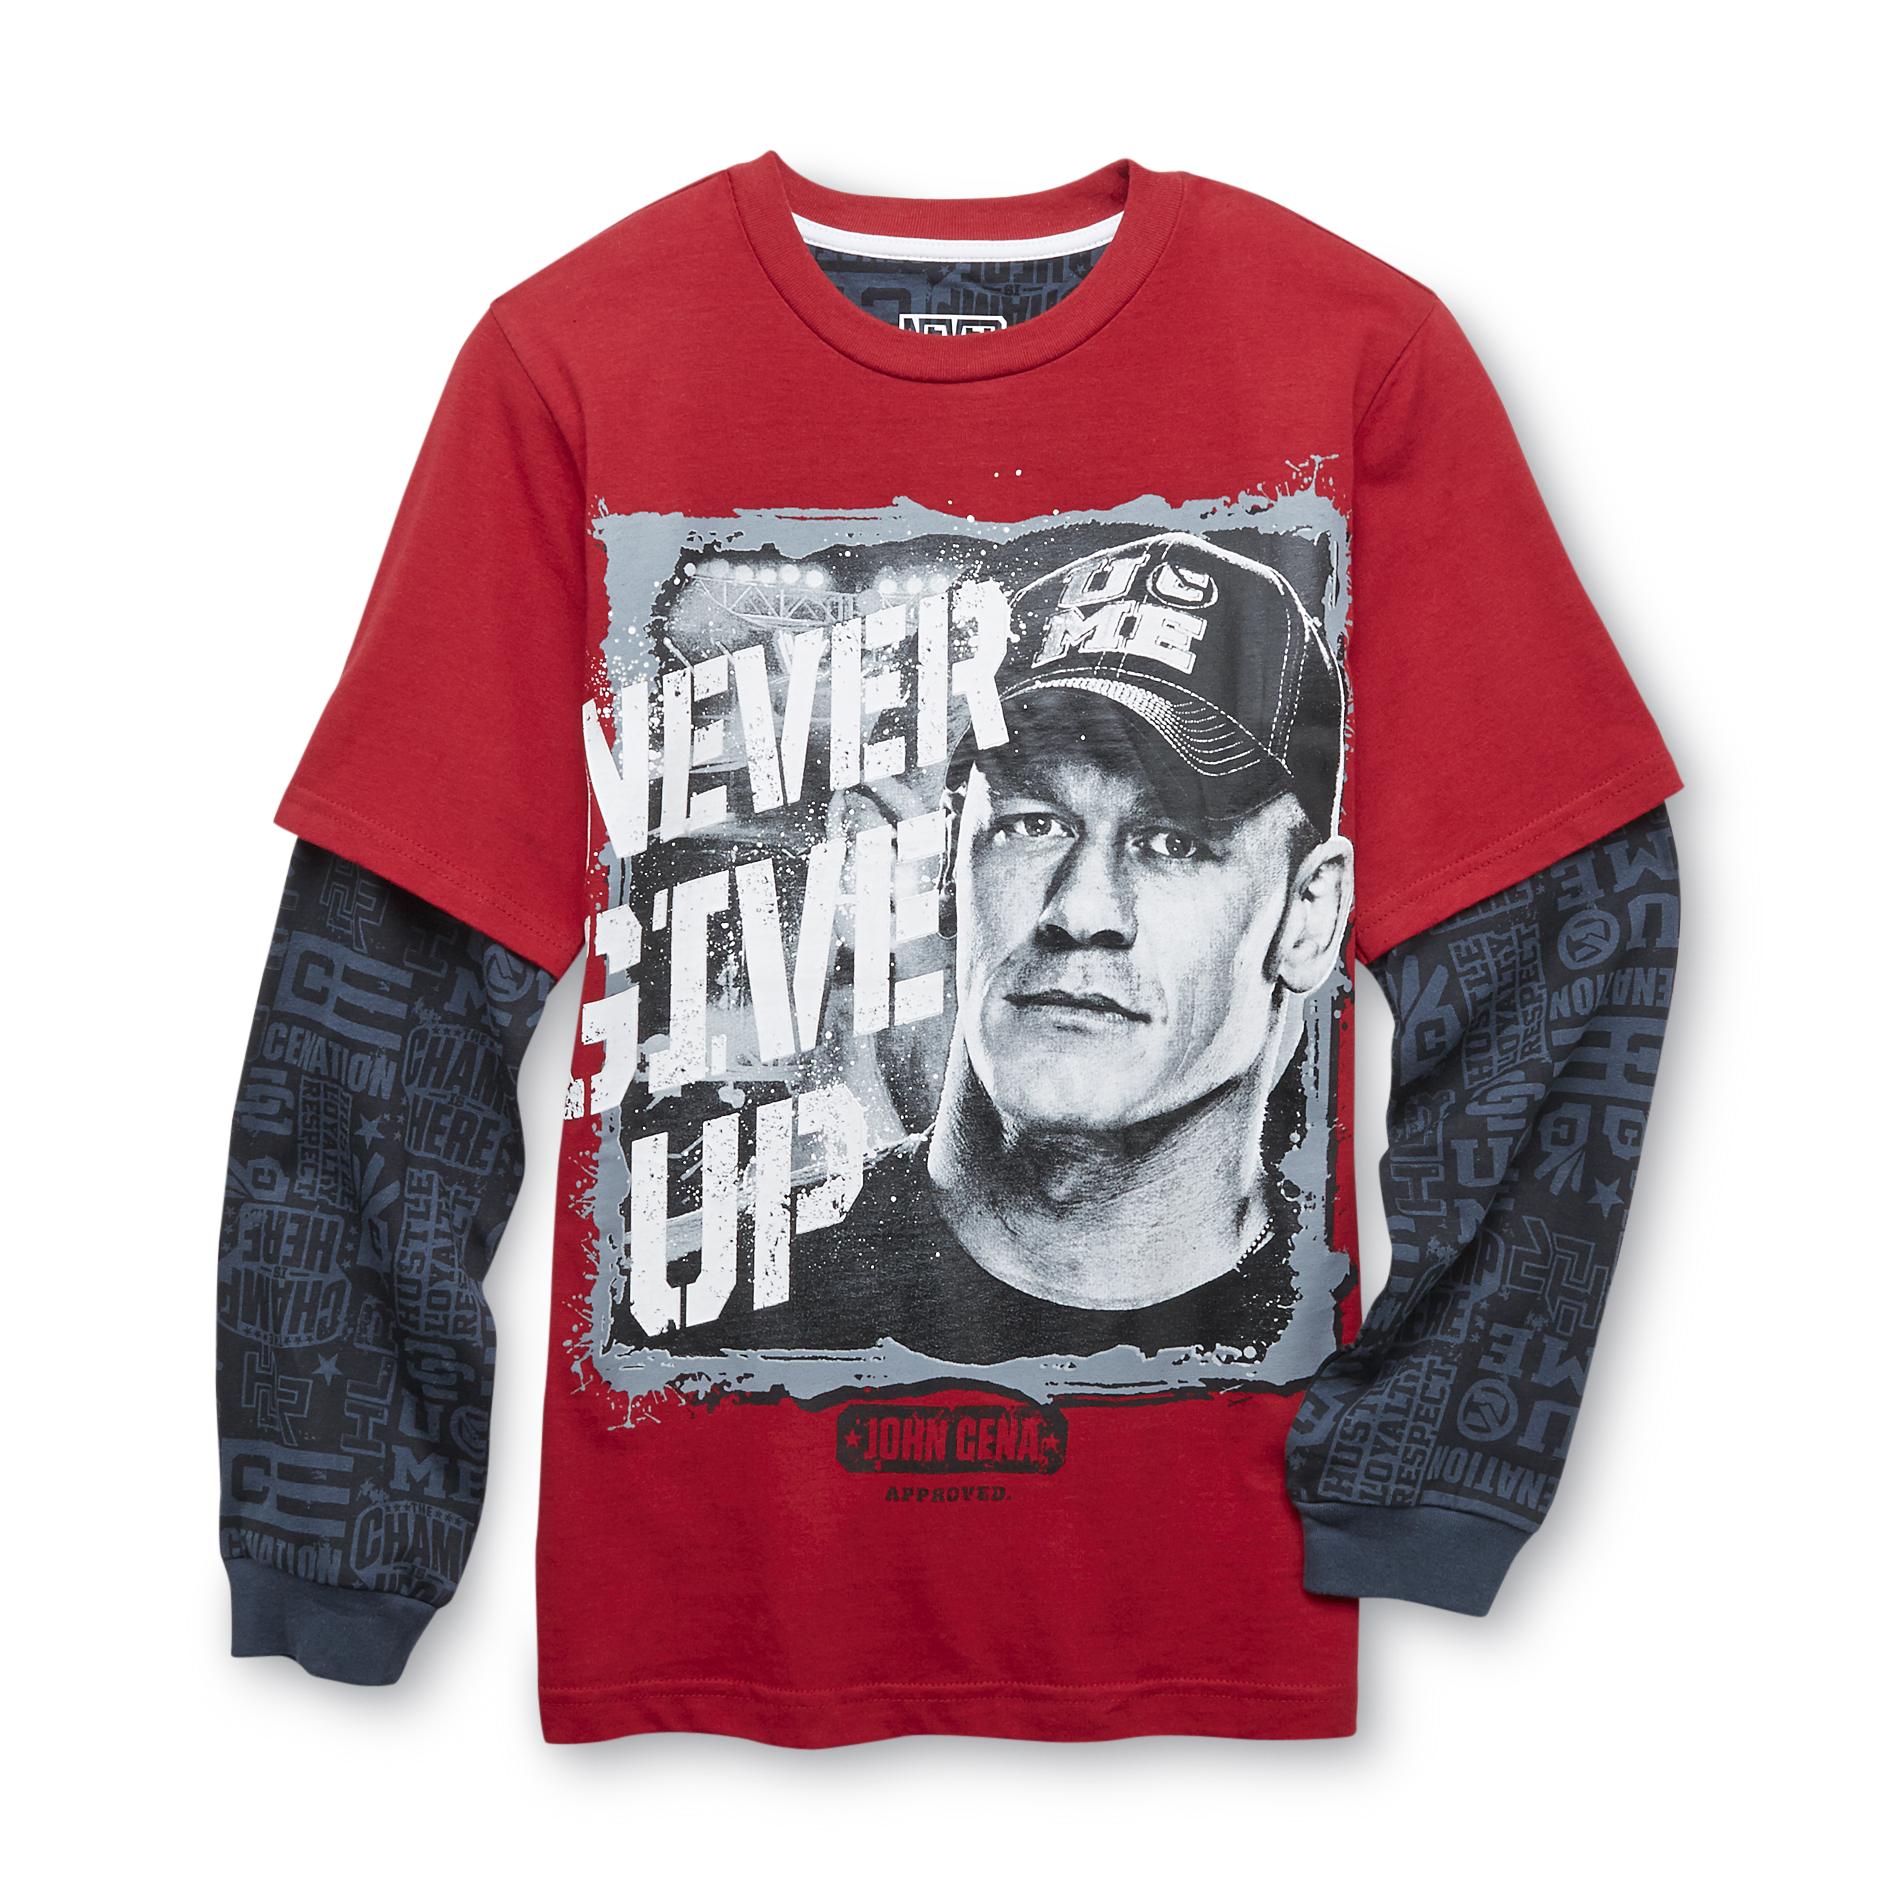 Never Give Up By John Cena Boy's Long-Sleeve Graphic T-Shirt - Never Give Up